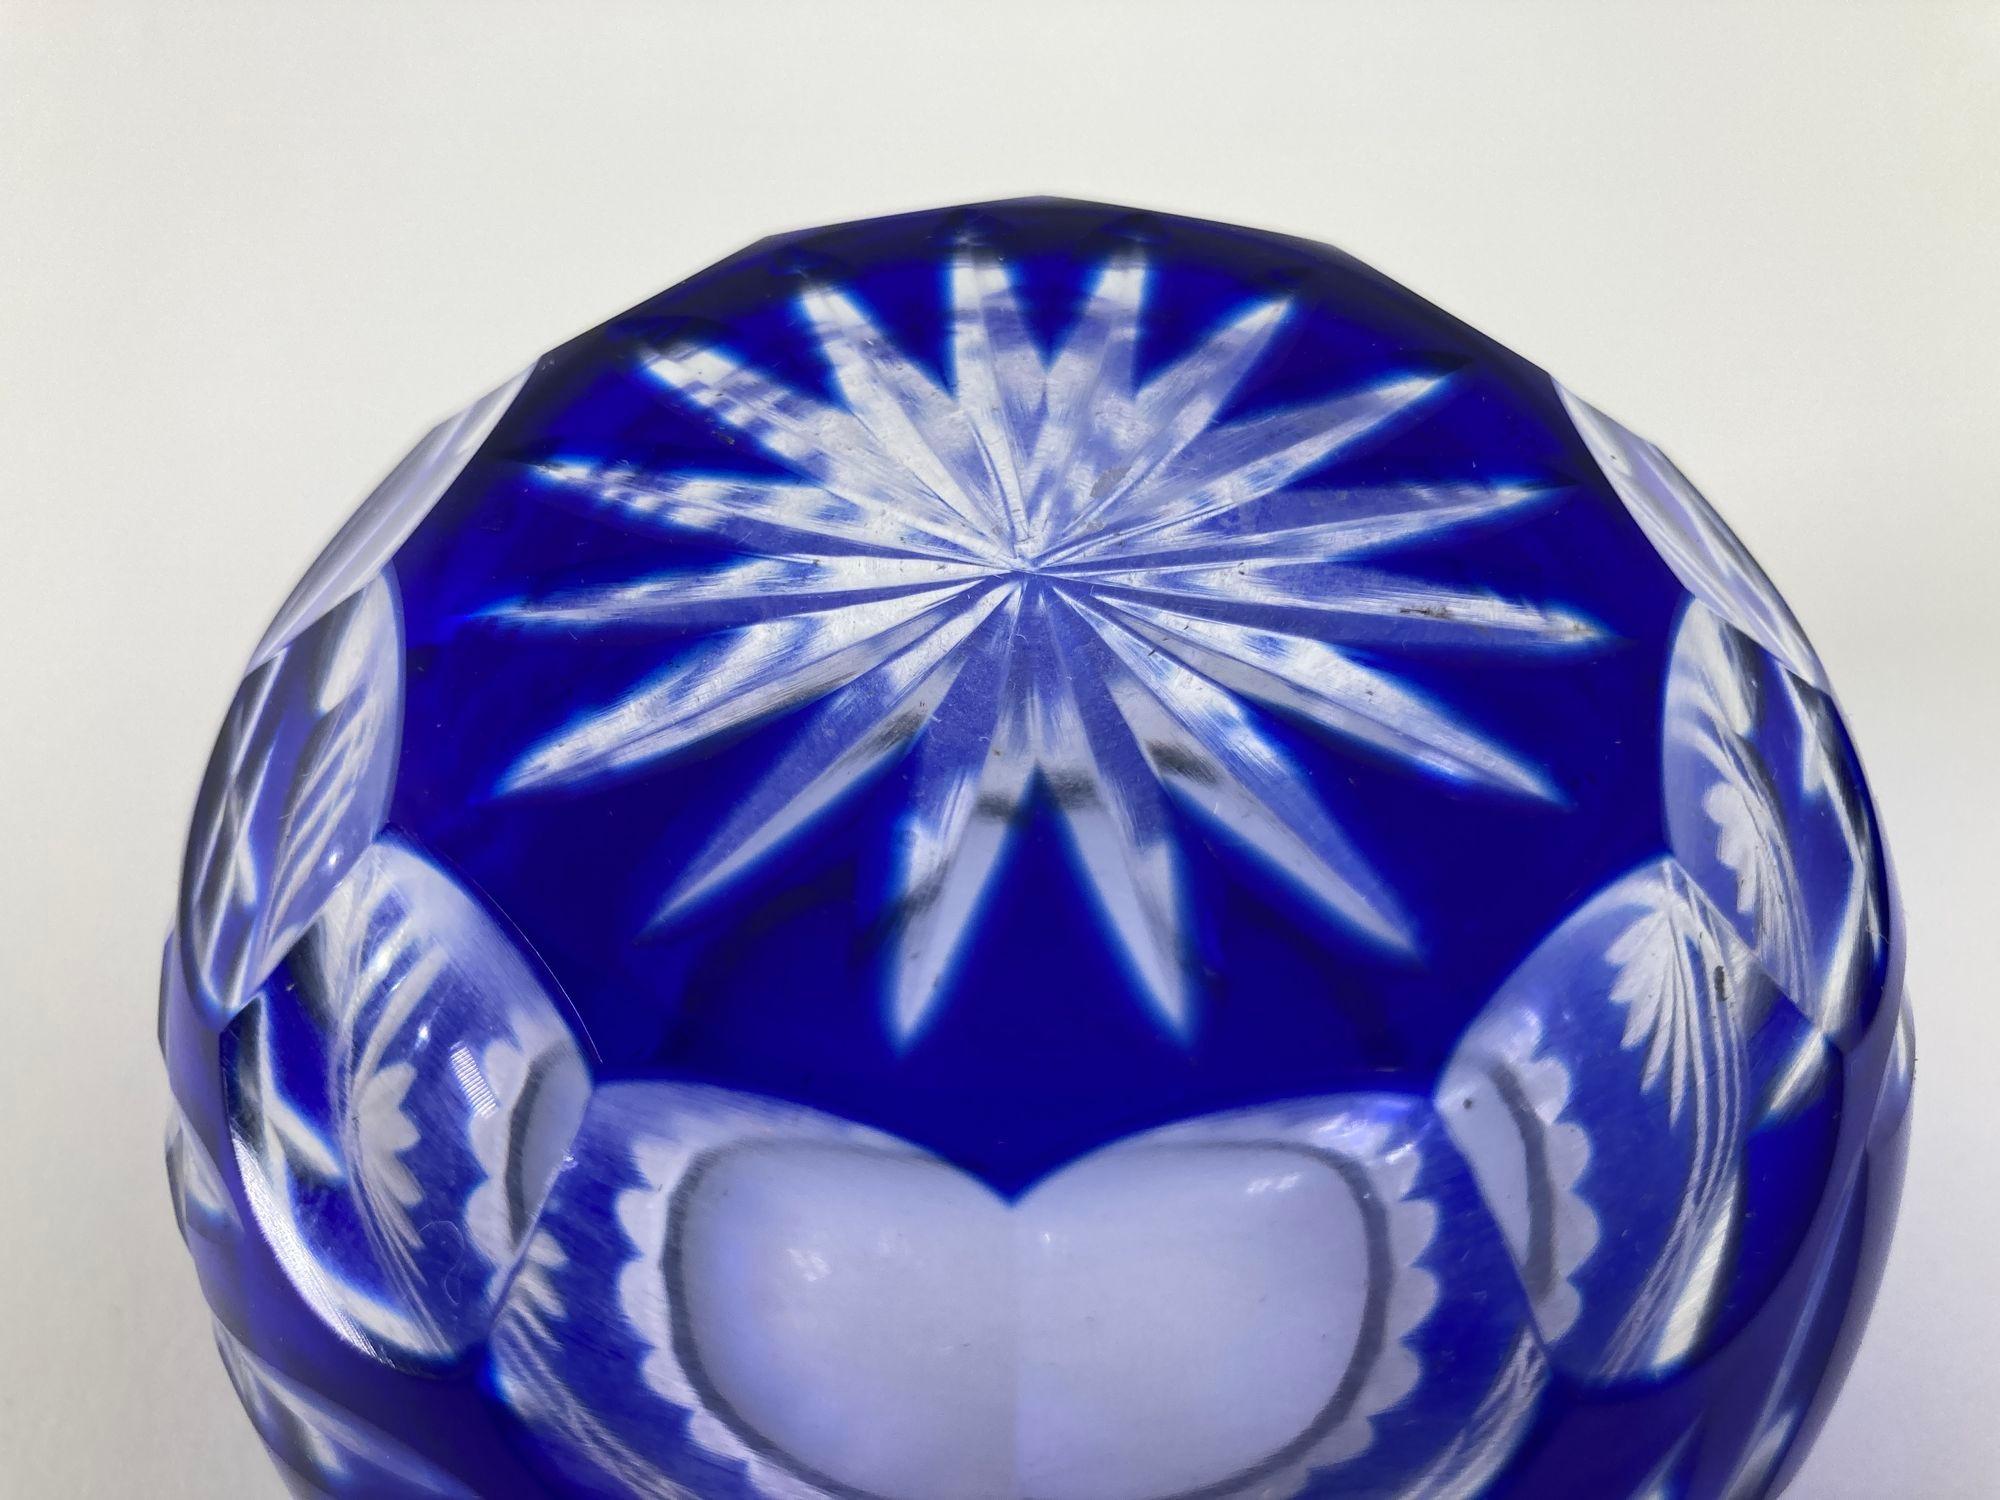 Vintage Bohemian Crystal Votive Candle Holder in Cobalt Blue In Good Condition For Sale In North Hollywood, CA